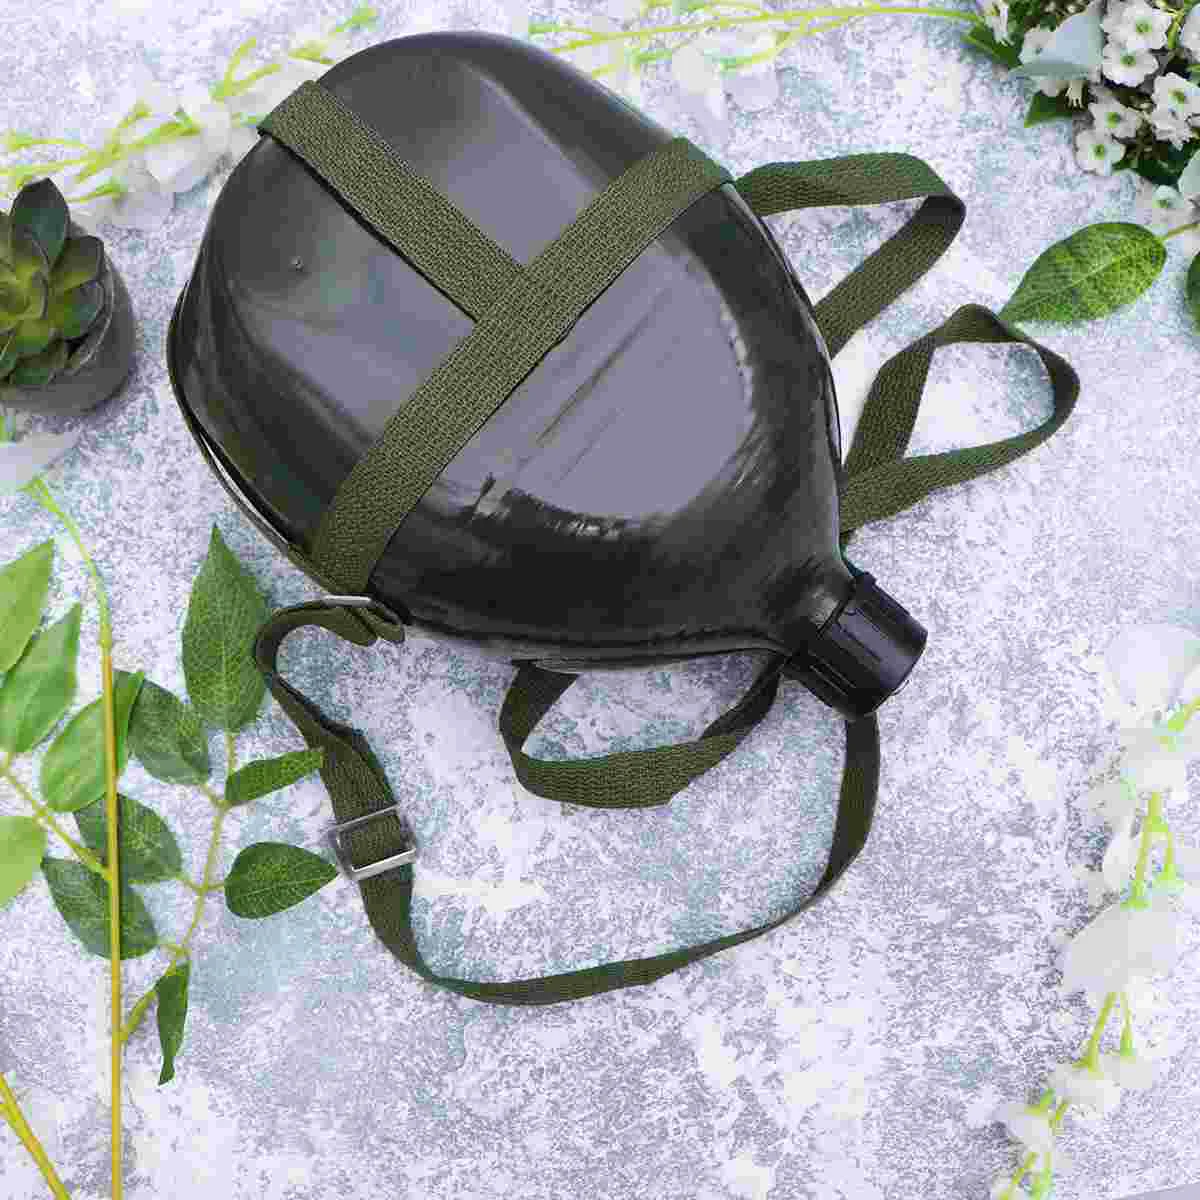 

1PC Green Thicken 2.5L Capacity Durable Canteen Kettle with Shoulder Strap for Travel Camping Outdoor